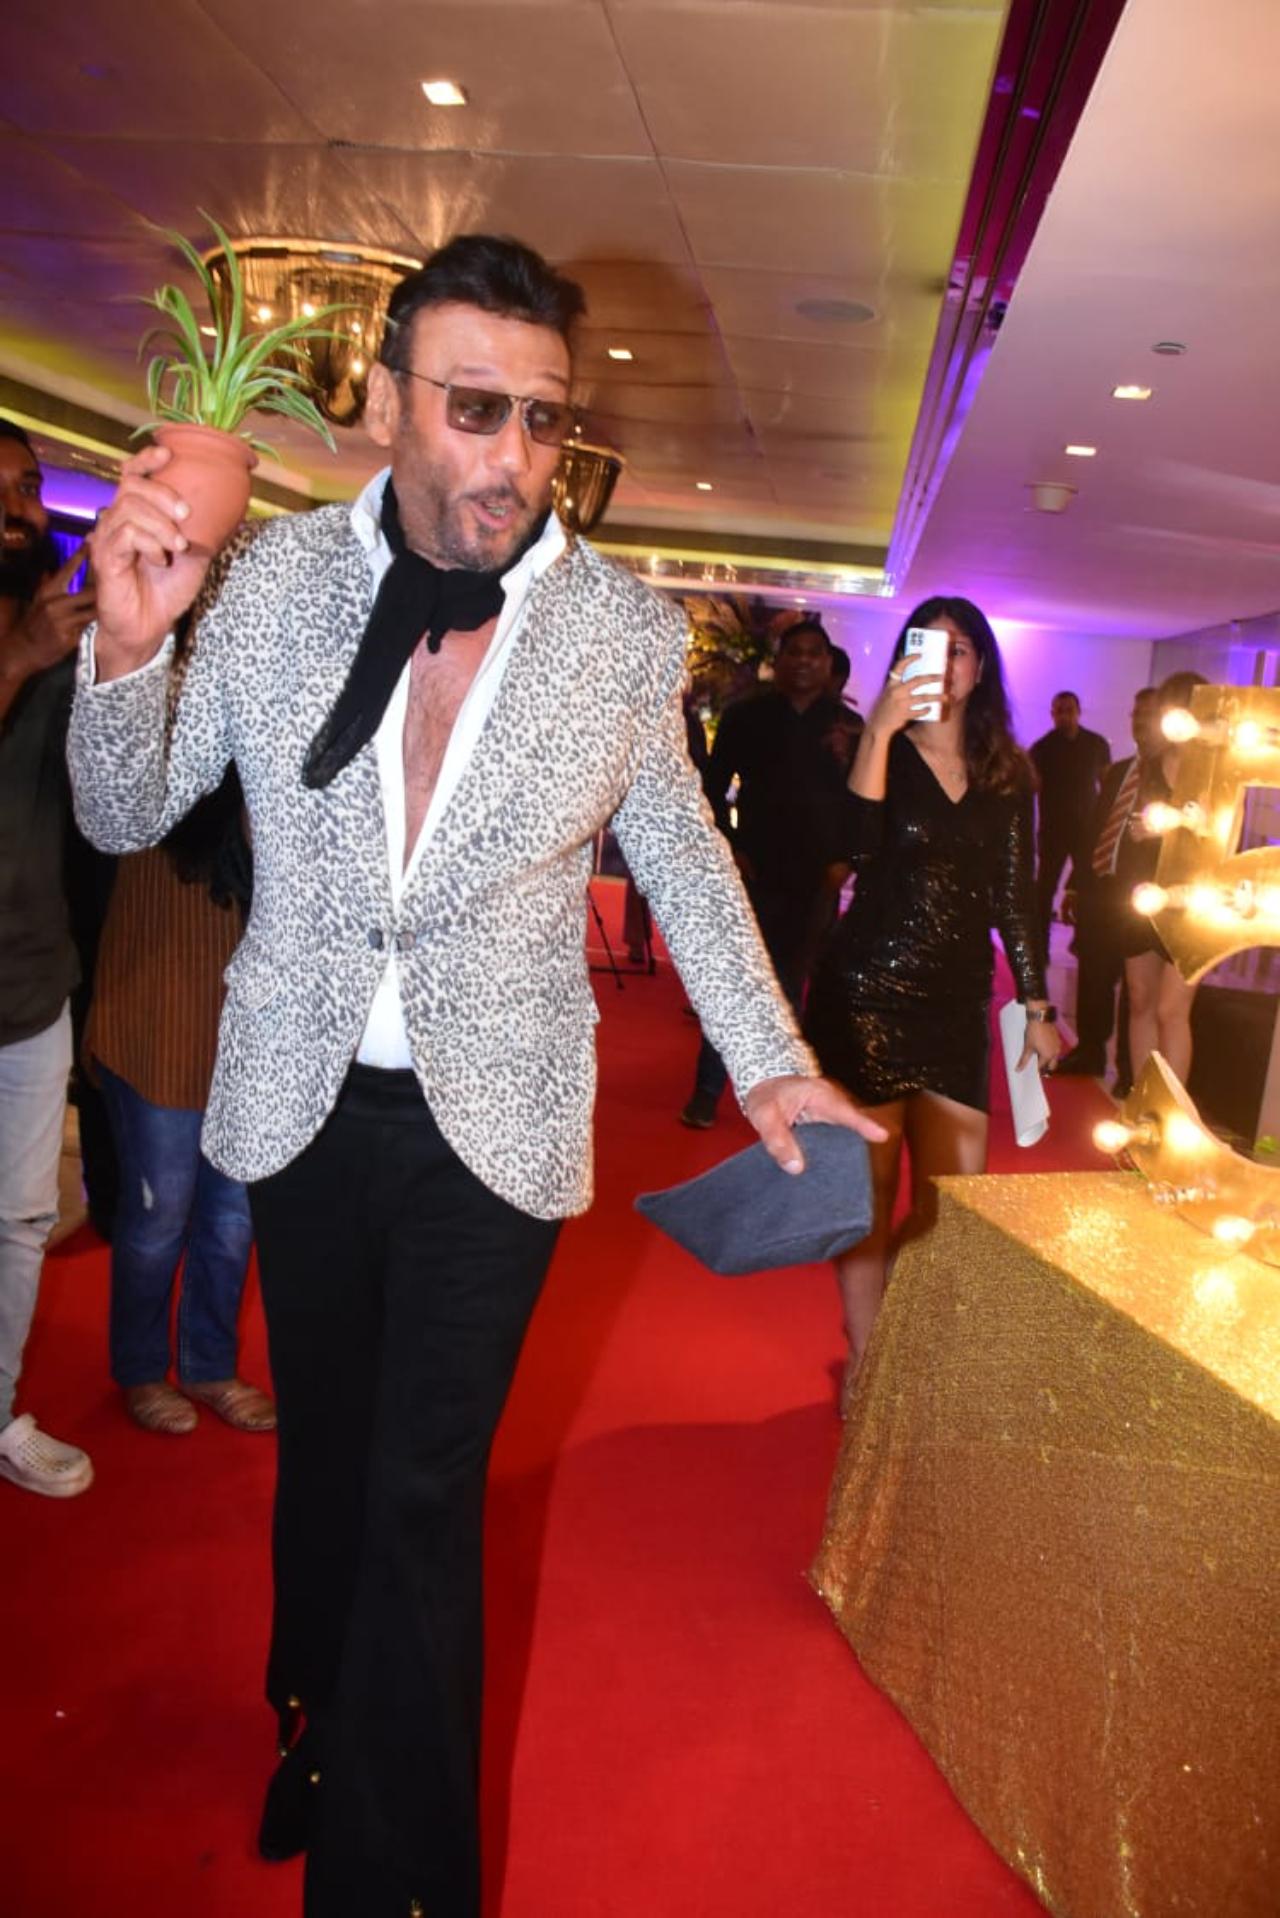 Jackie Shroff was one of the few guests who seemed to playfully 'break' the black dress code of the party. He seemed to be the life of the party in his grey leopard print jacker and black neck scarf